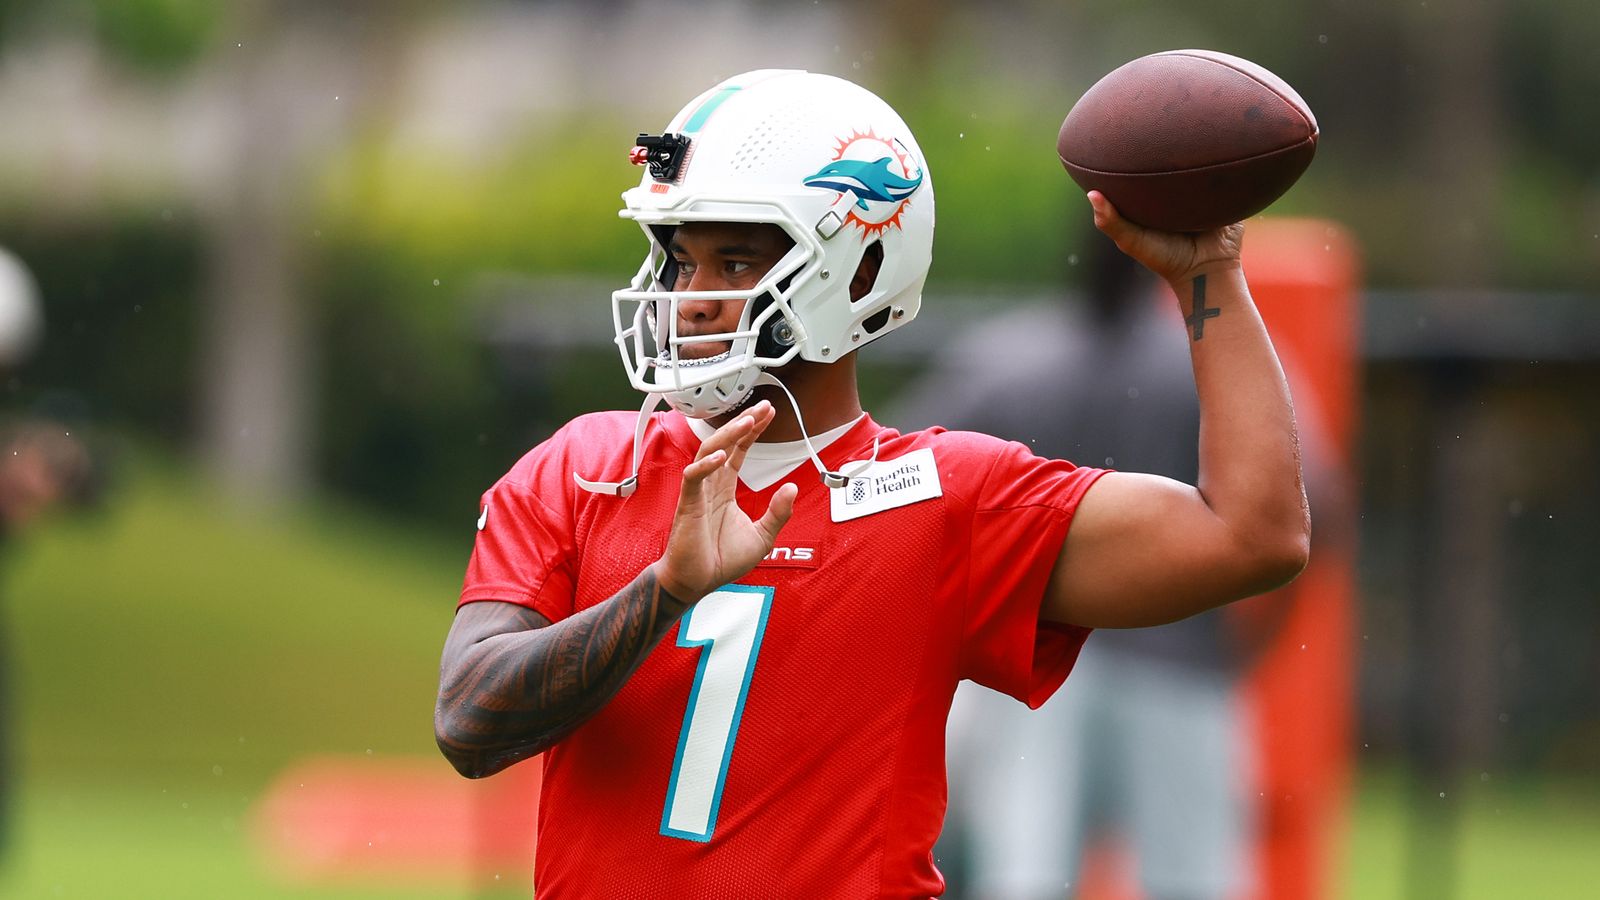 Miami Dolphins Announce Schedule for 2023 Training Camp Presented by  Baptist Health